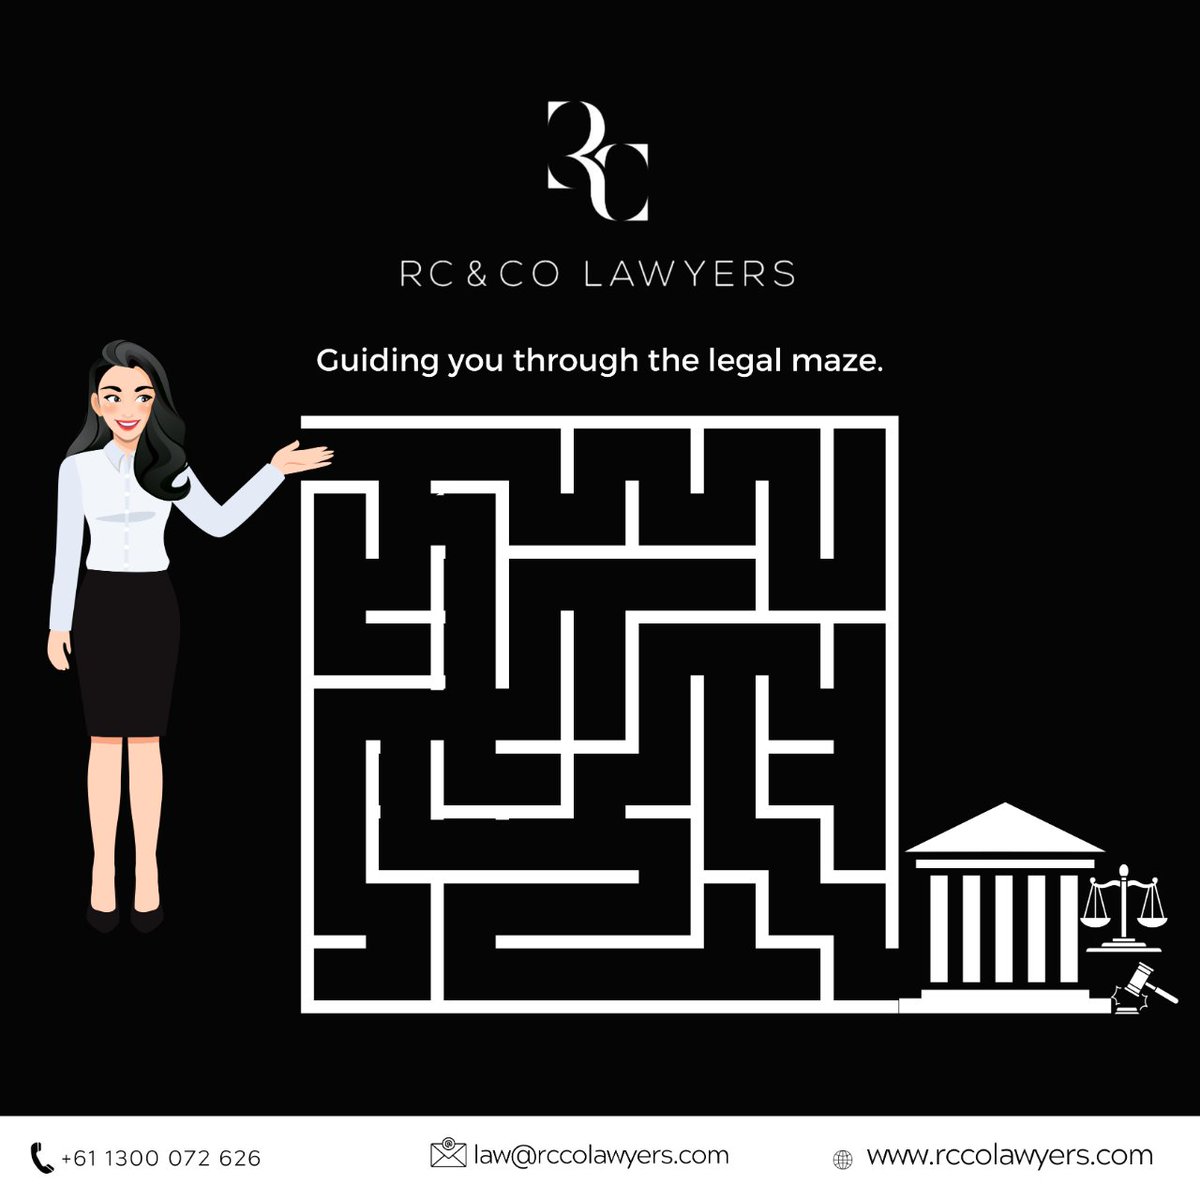 RC & Co Lawyers Provides Expert Navigation for Confident Decision-Making. #rccolawyers #legal #legalservices #lawfirm #australia #debtcollection #conveyancing #familylaw #property #immigrationlawyer #insuranceclaims #insolvency #immigration #litigation #buildingconstruction